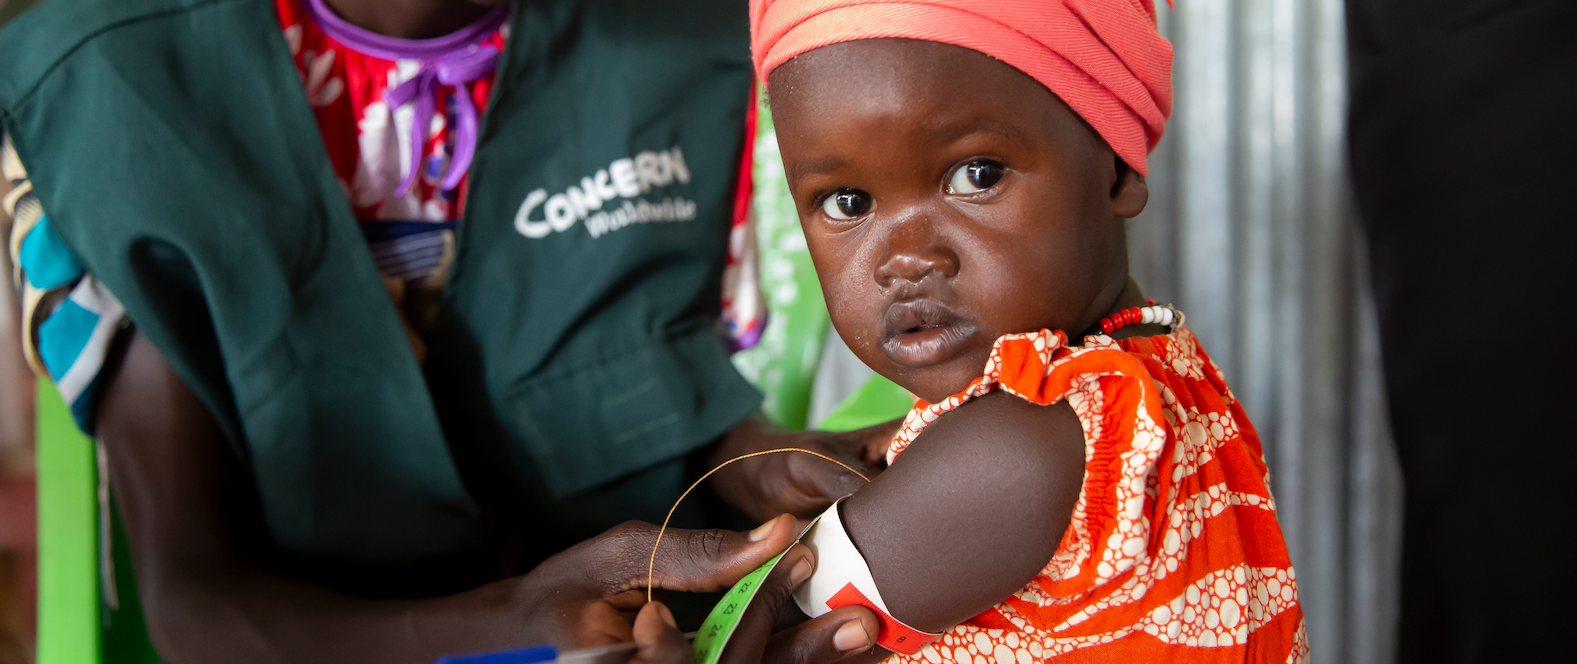 Baby Nya has her MUAC measured by Nya Guon Chuol Riek, a Community Outreach Mobilizer with Concern Worldwide, at Old Nuer nutrition site in Gambella, Ethiopia